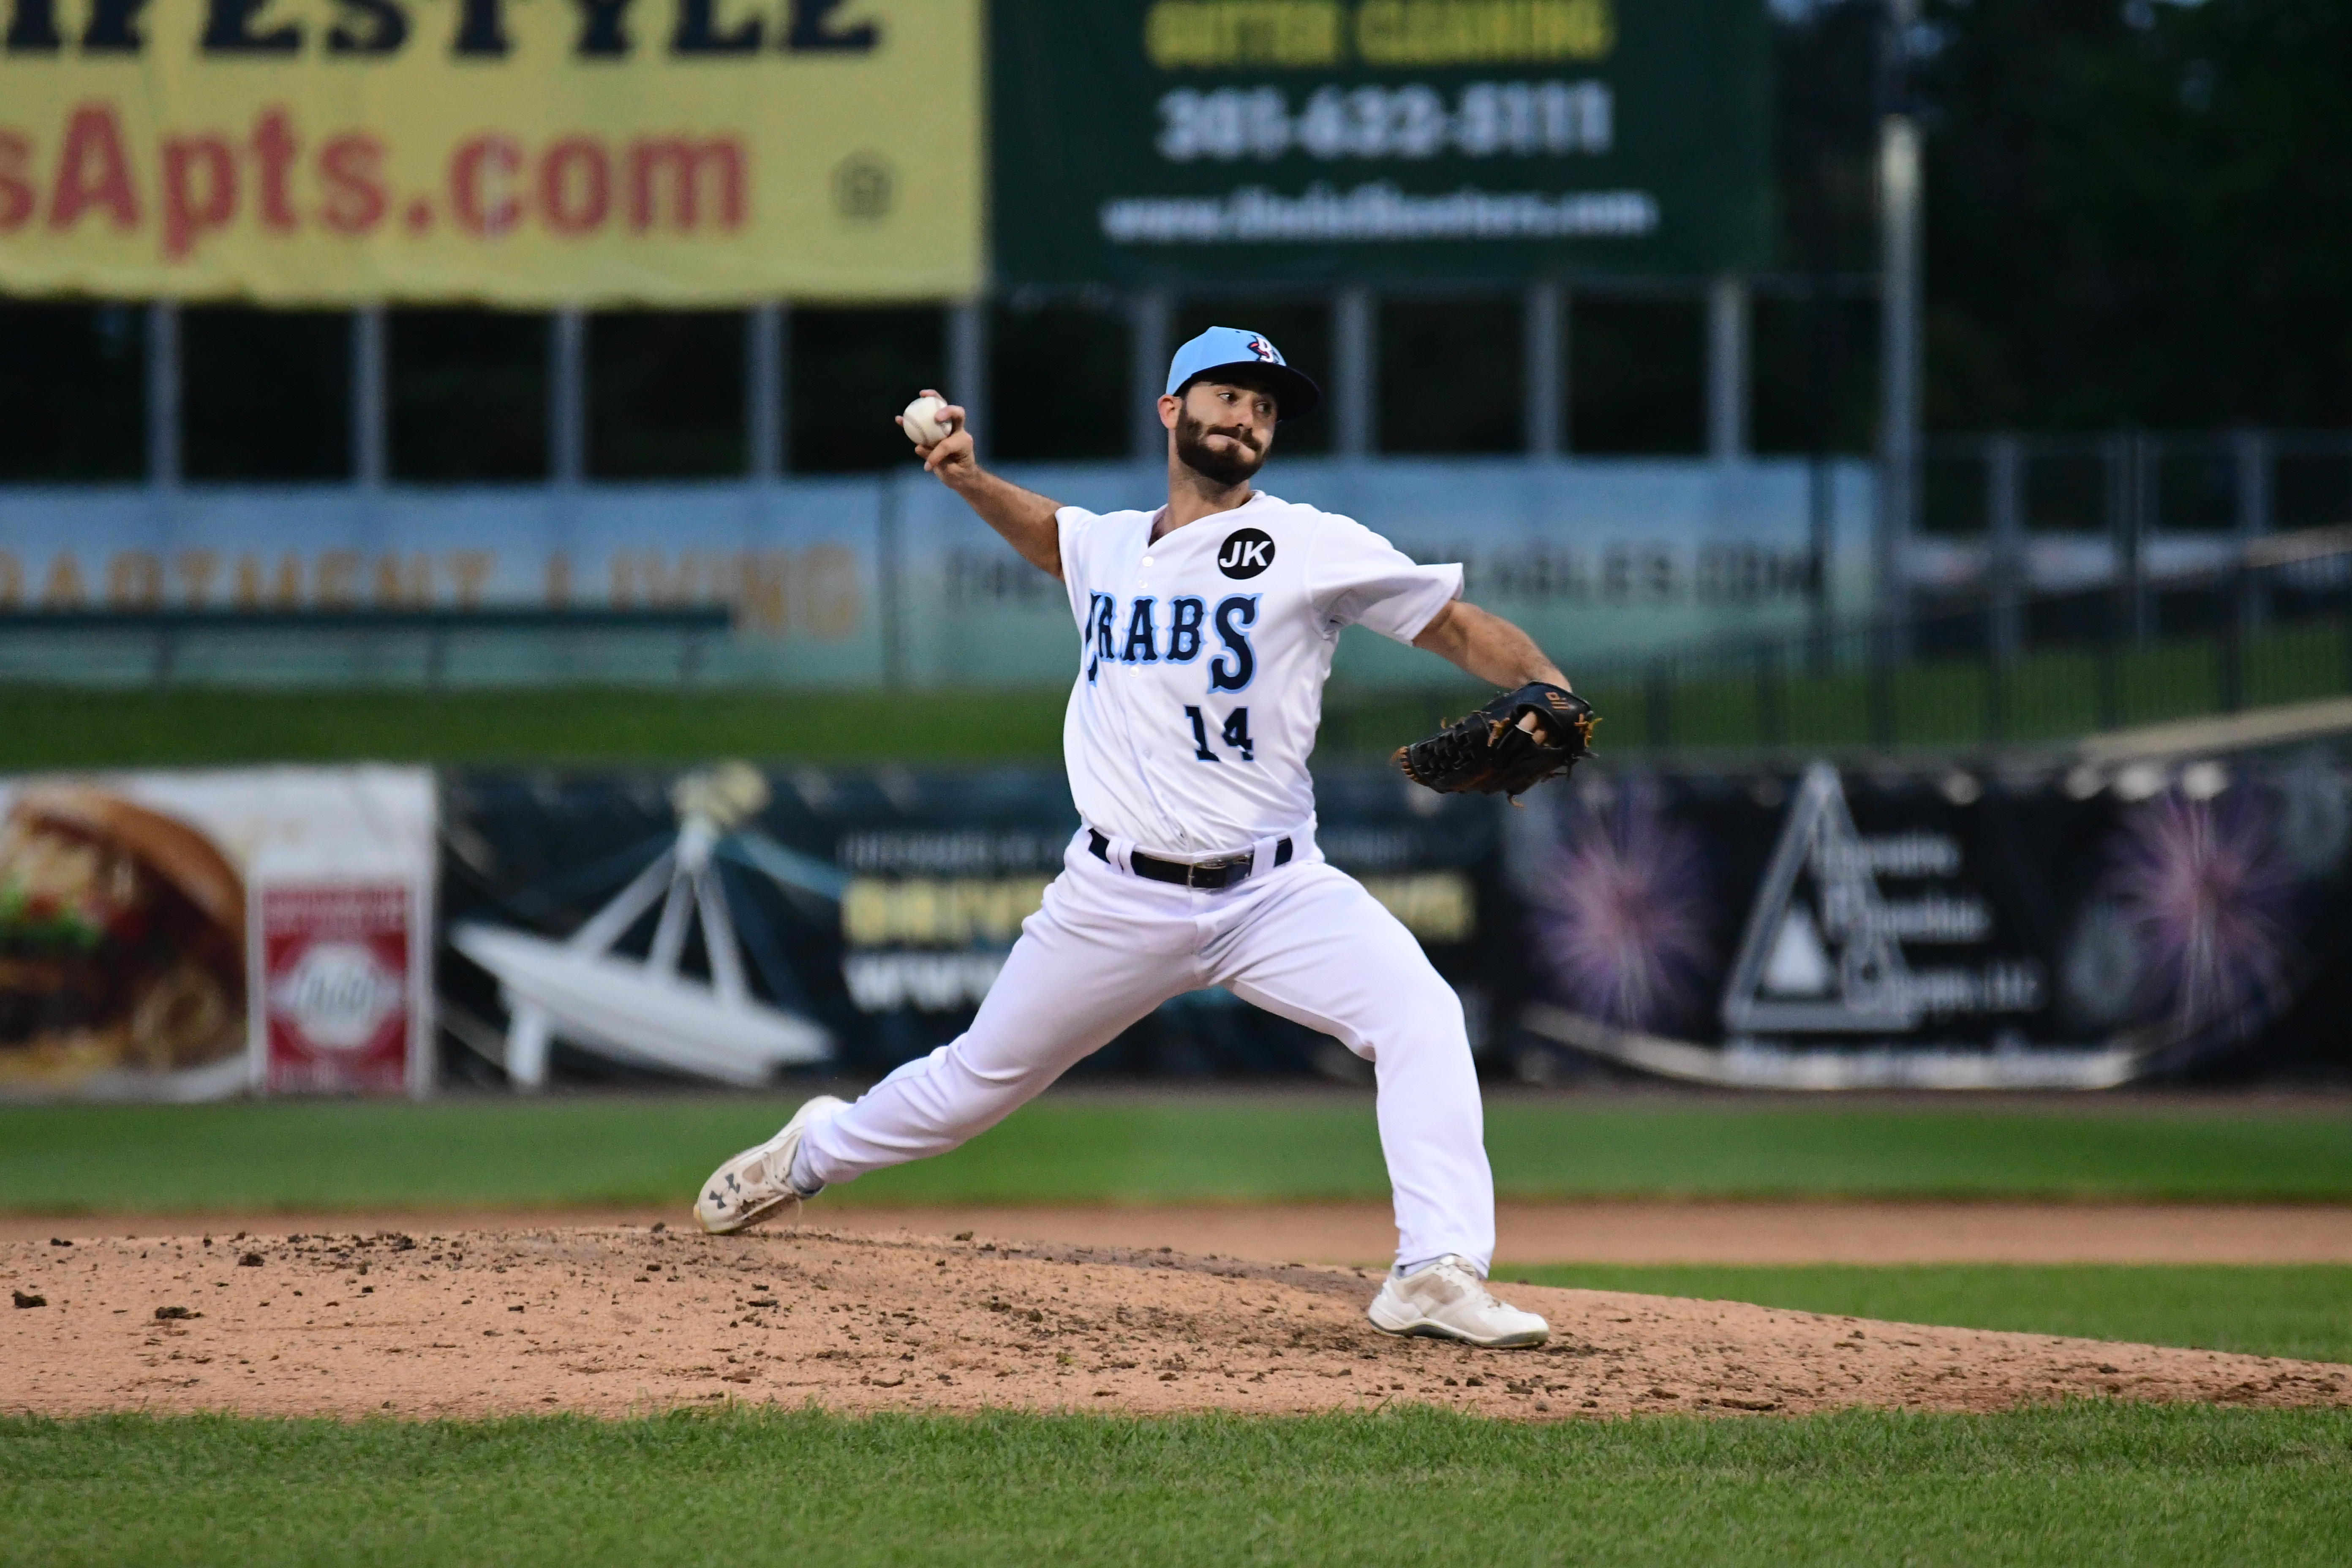 Late Rally leads to Blue Crabs Victory